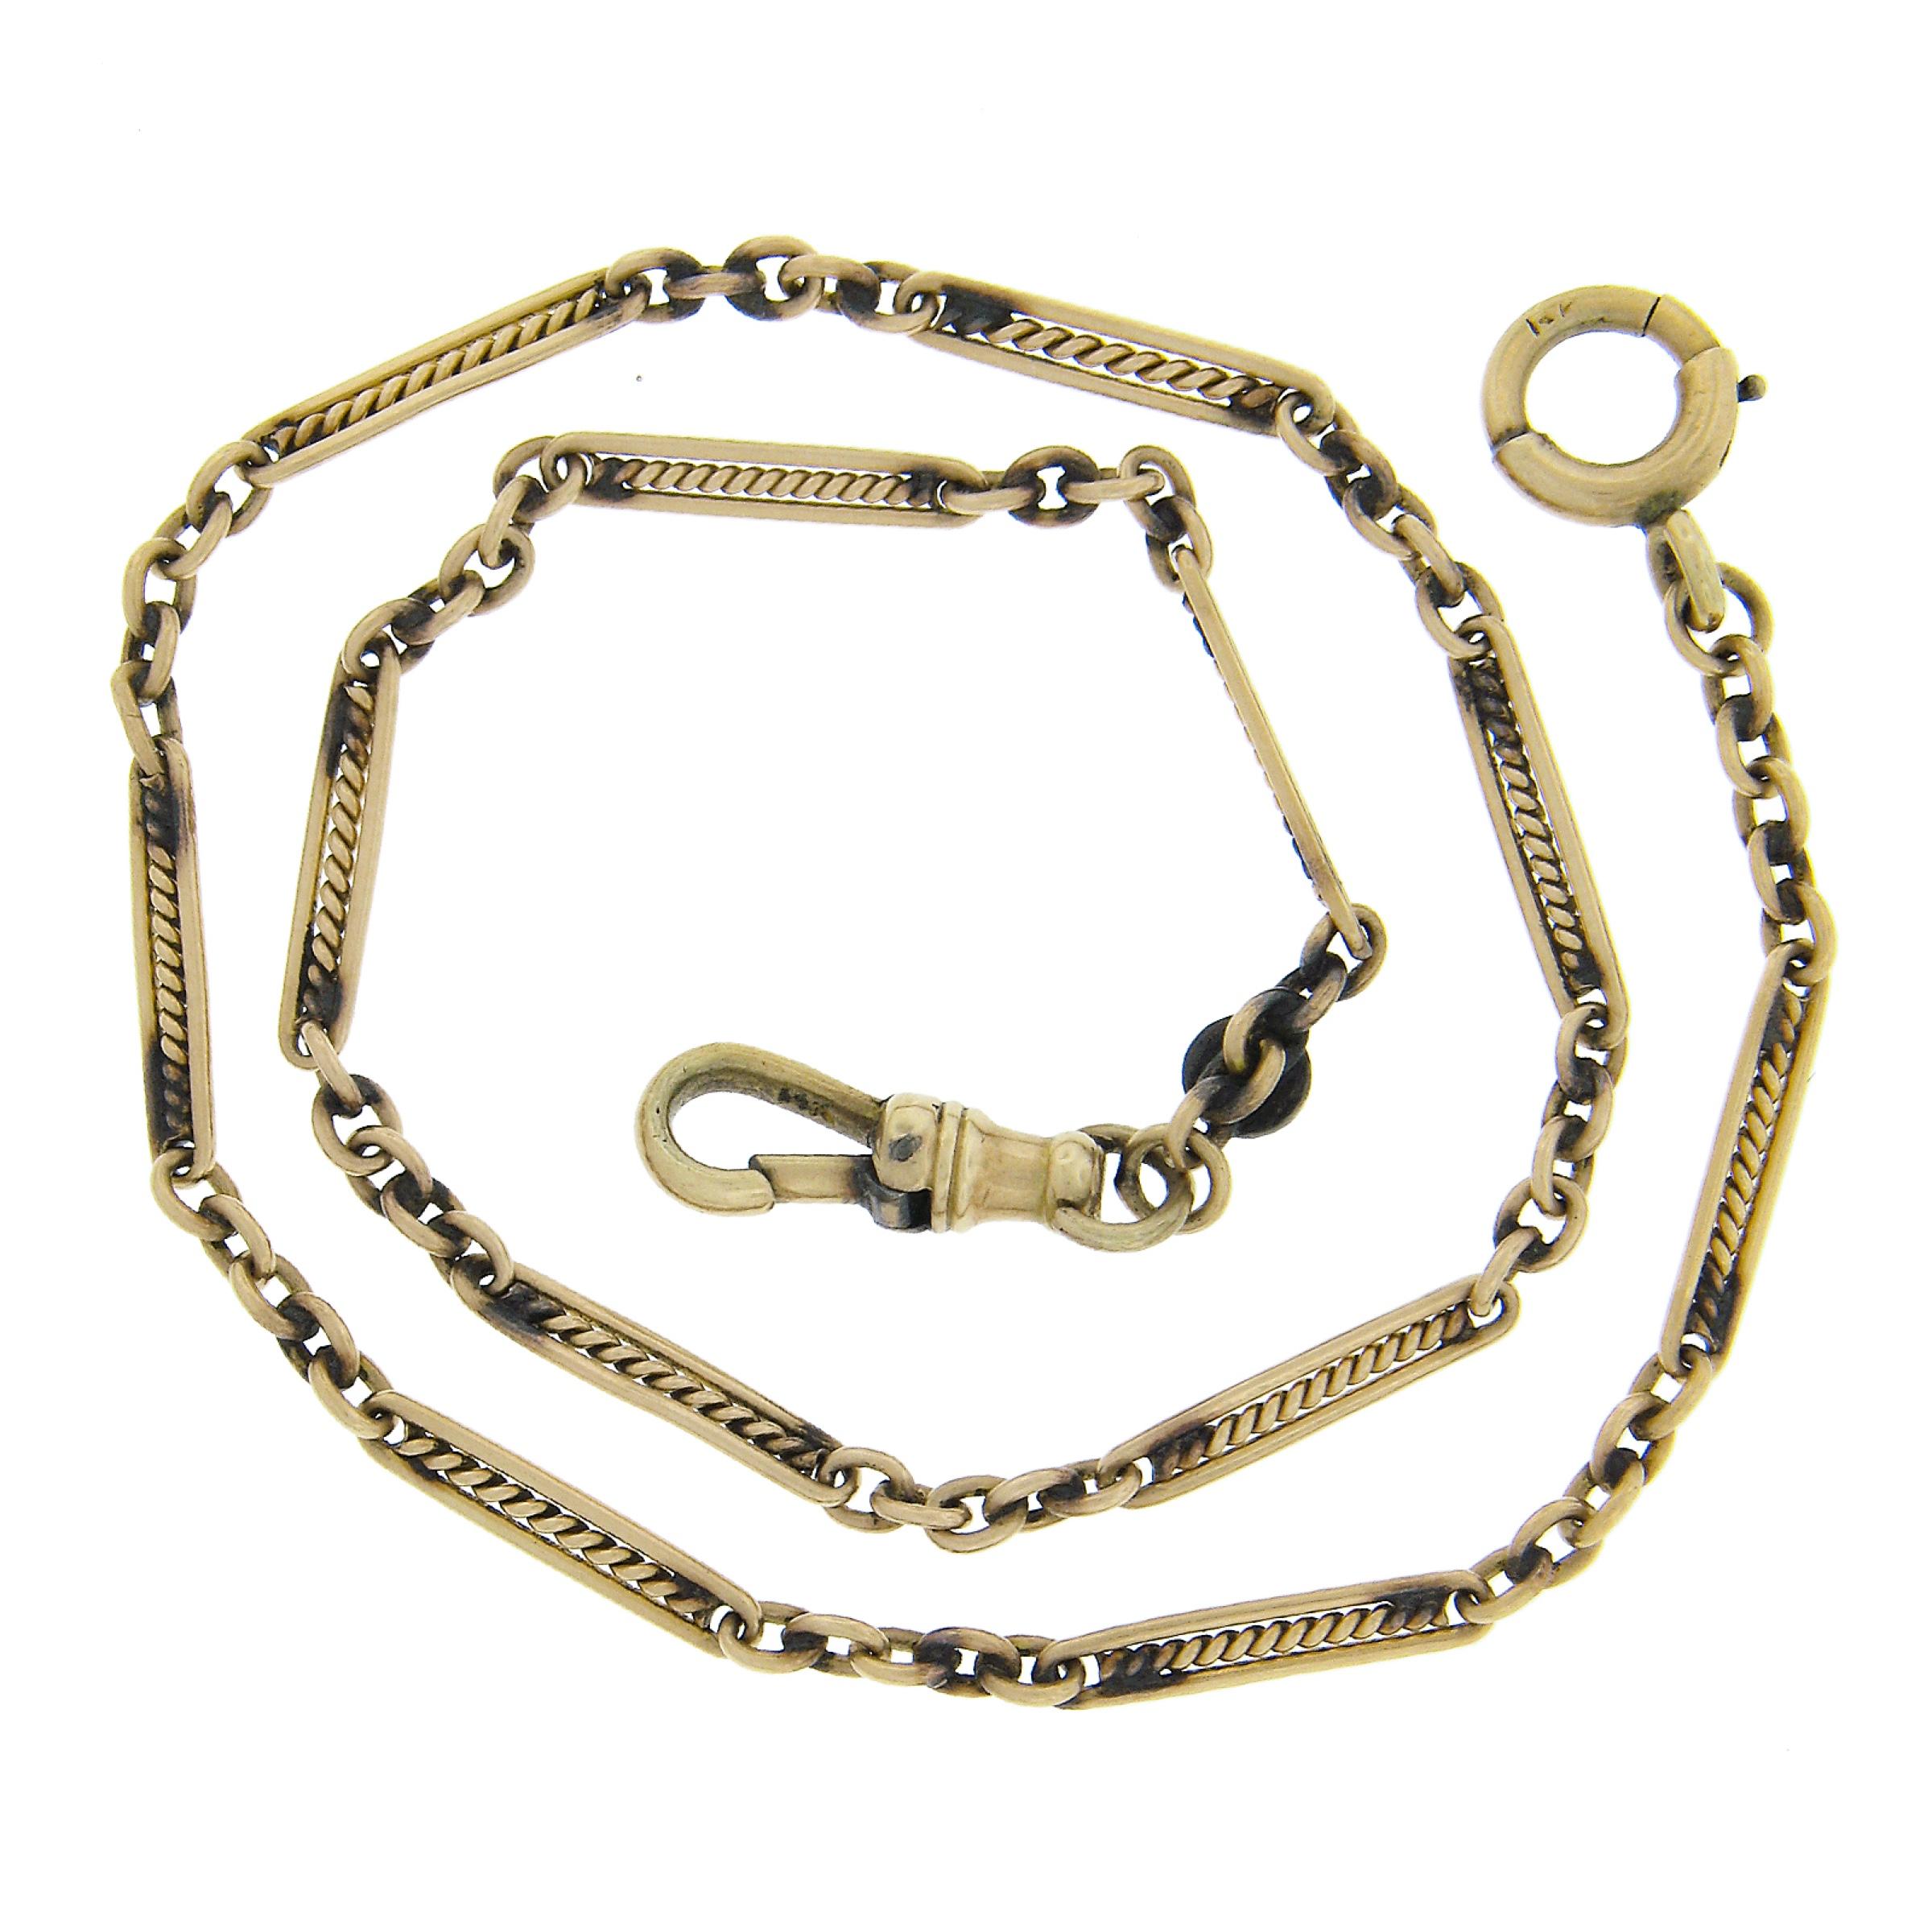 Material: Solid 14k Yellow Gold
Weight: 8.40 Grams
Chain Type: Twisted Wire & Cable Link
Overall Length: 13 Inches (next to a ruler)
Chain Width: 2.8mm 
Thickness: 1.1mm
Clasp Measurements (inside): 6.8x2.6mm (approx.) (dog clasp) - 5mm (approx.)